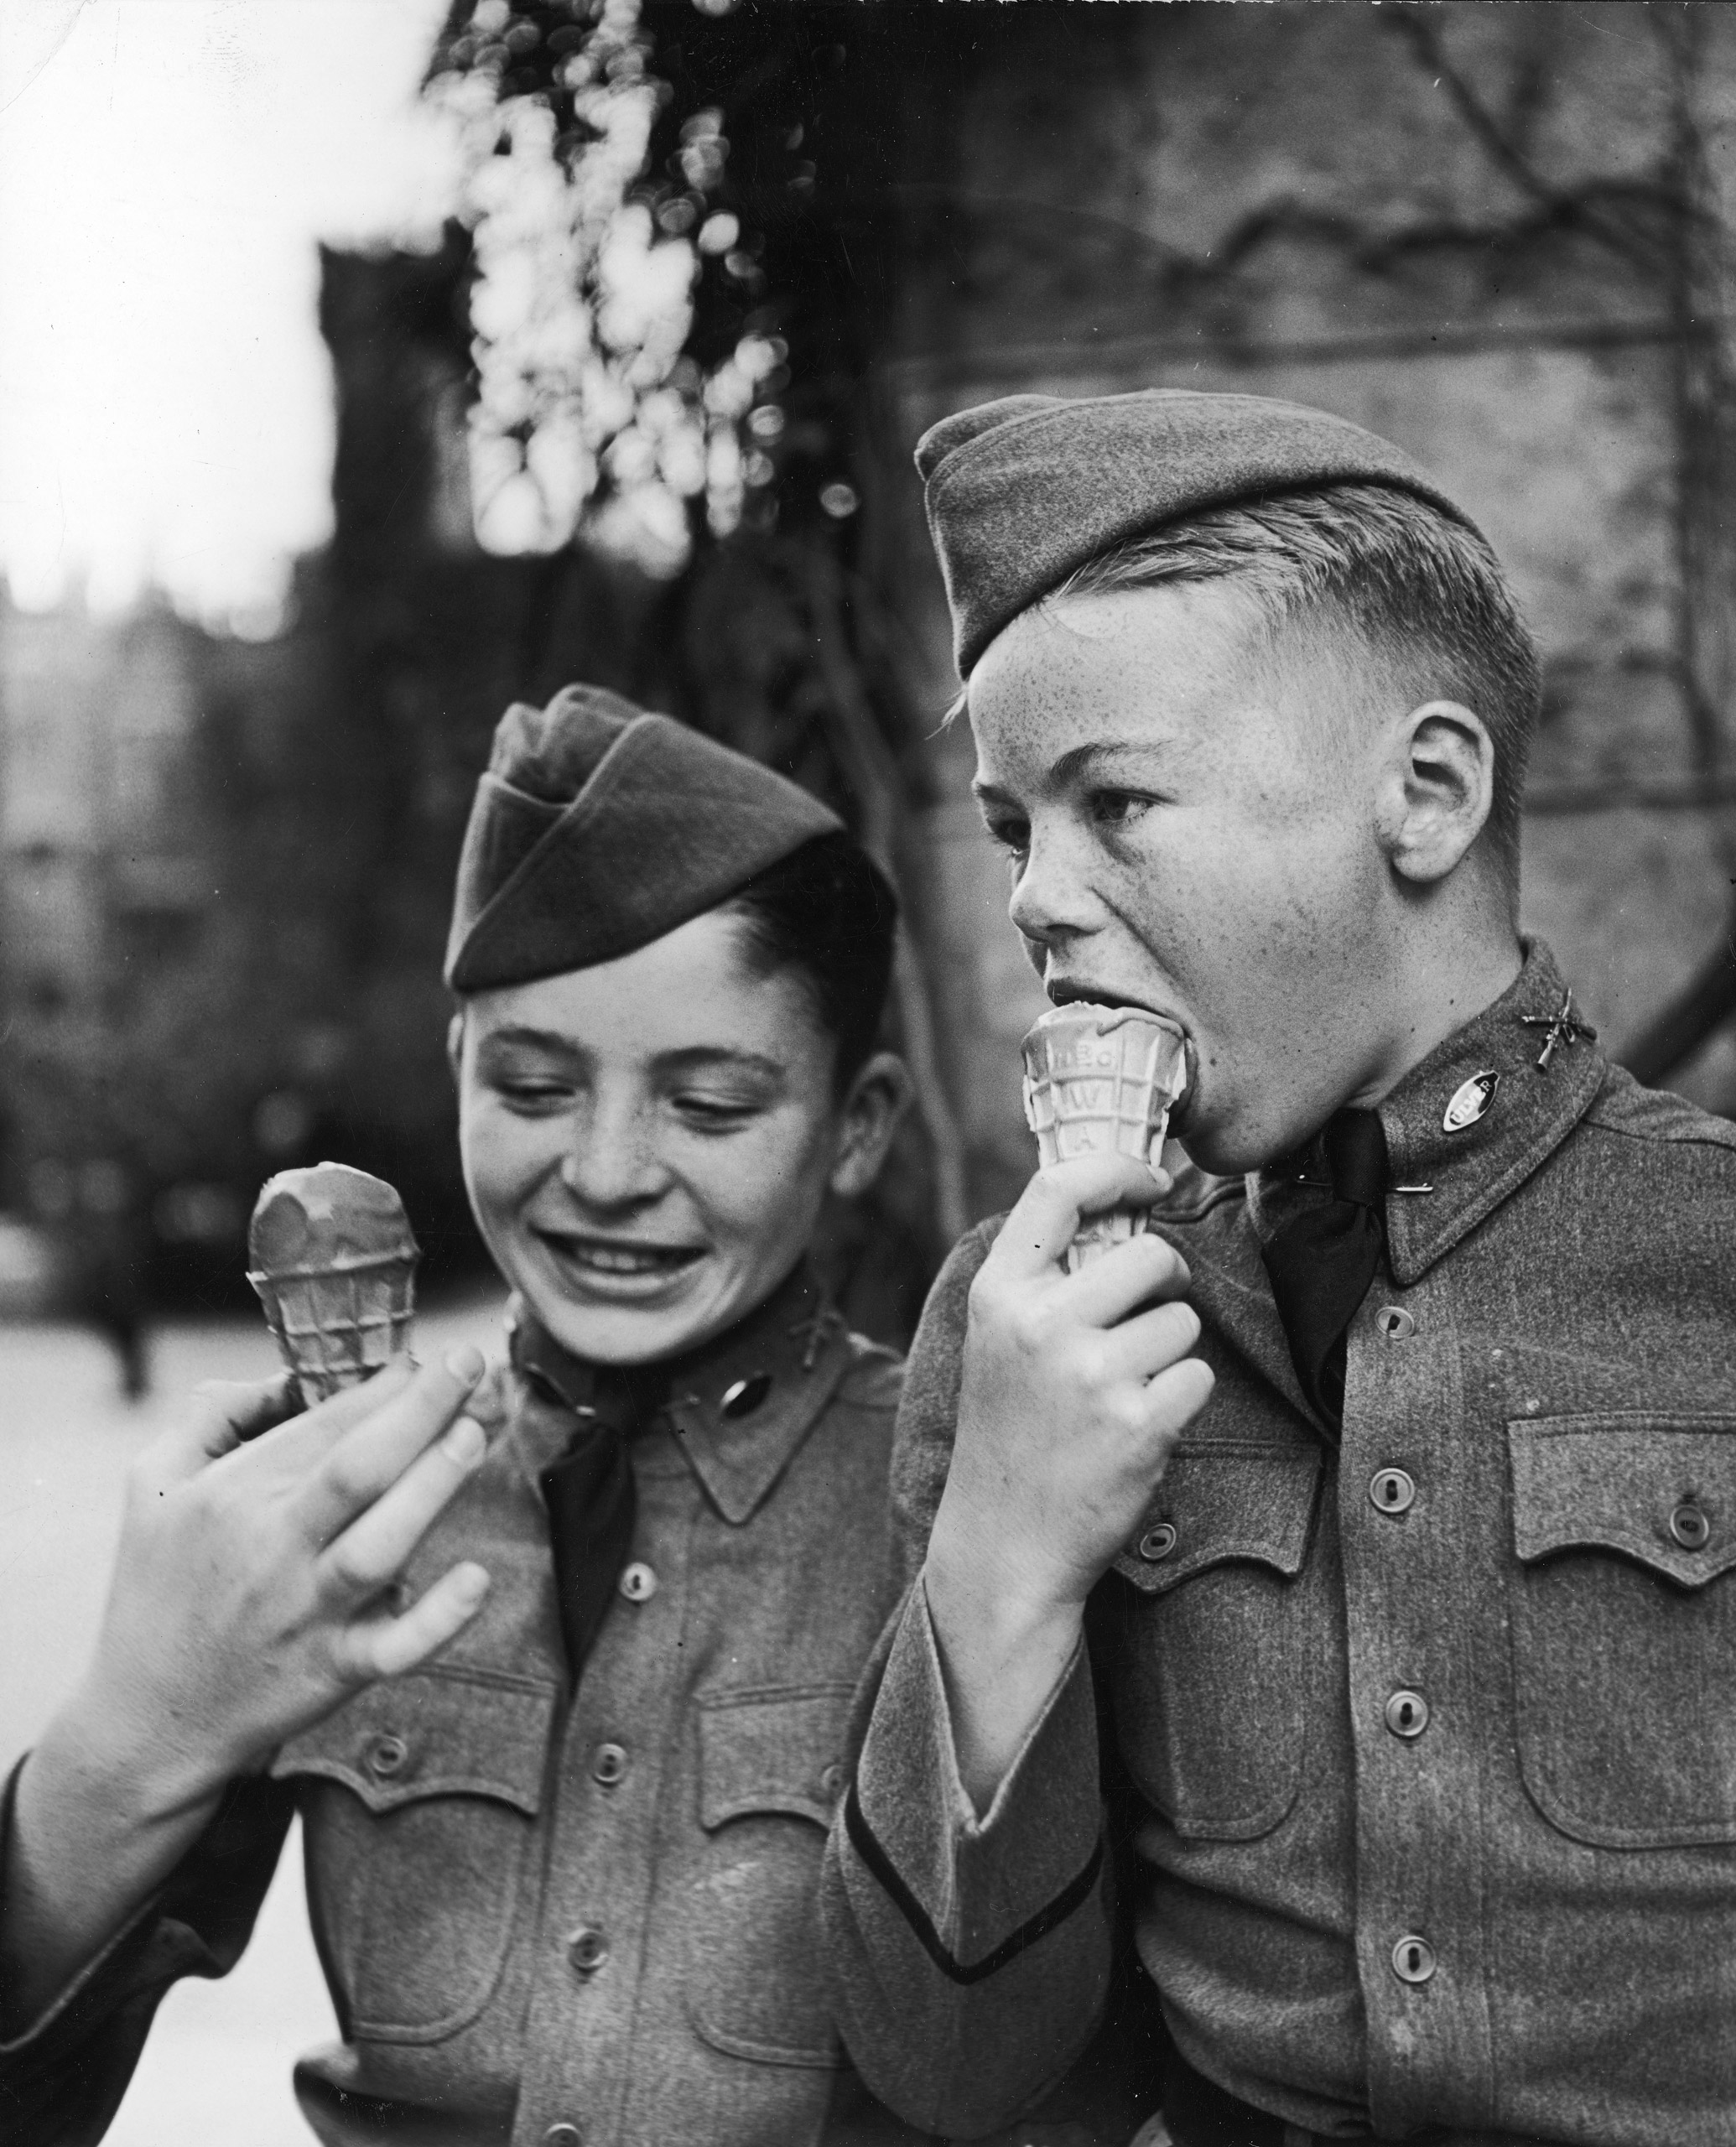 Two young boys eating ice cream, 1939.